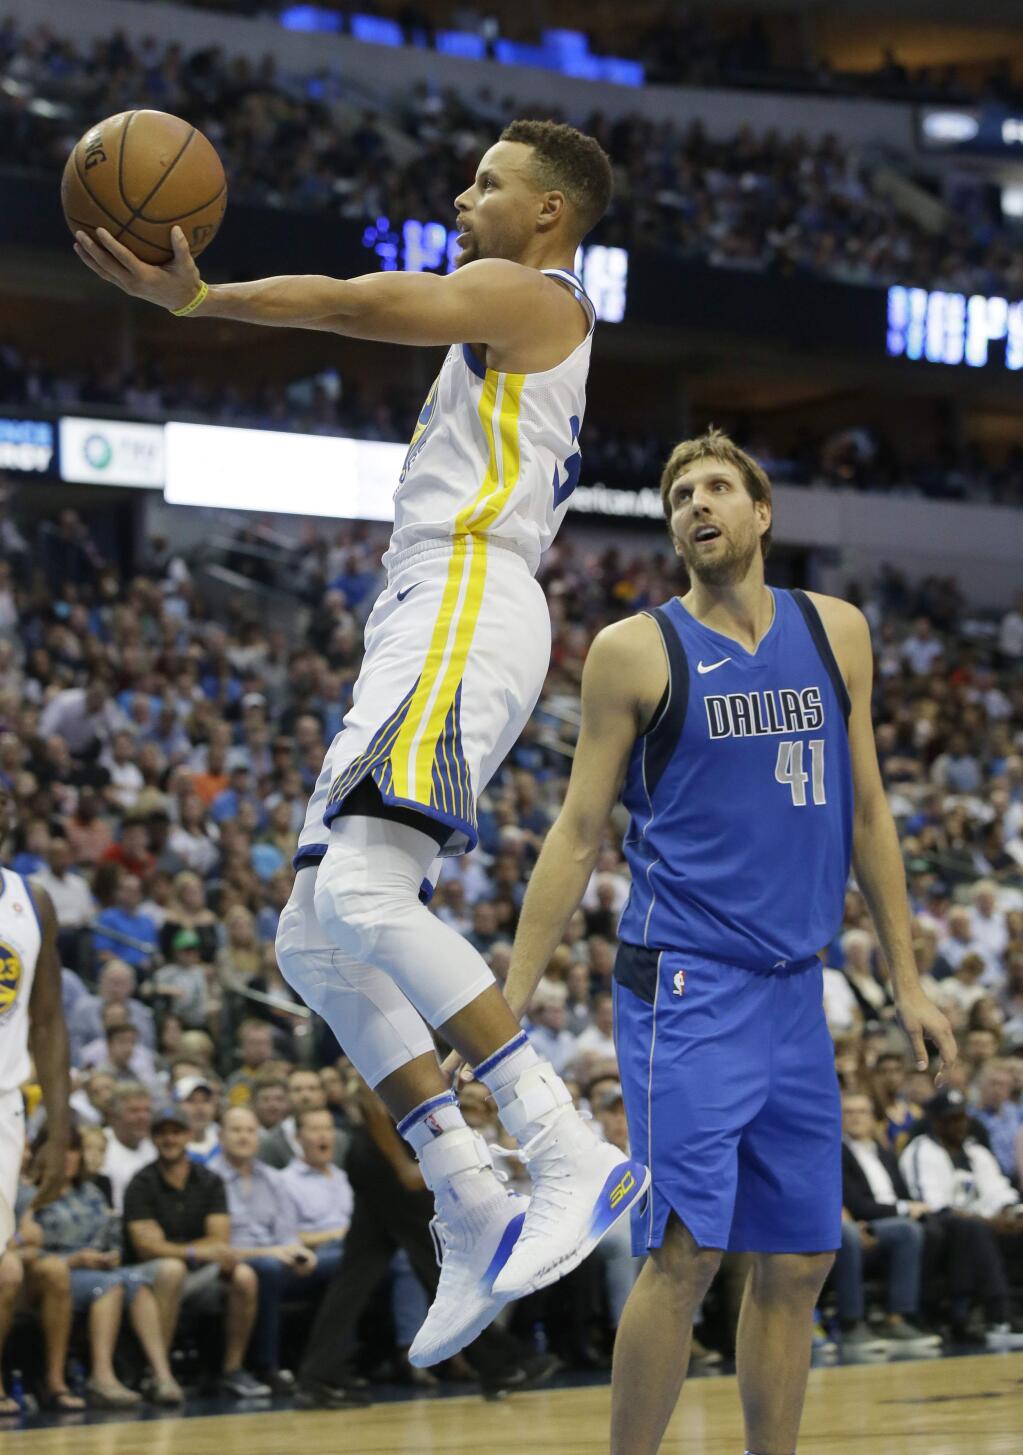 Golden State Warriors guard Stephen Curry, left, shoots past Dallas Mavericks forward Dirk Nowitzki (41) of Germany during the first half of an NBA basketball game in Dallas, Monday, Oct. 23, 2017. (AP Photo/LM Otero)